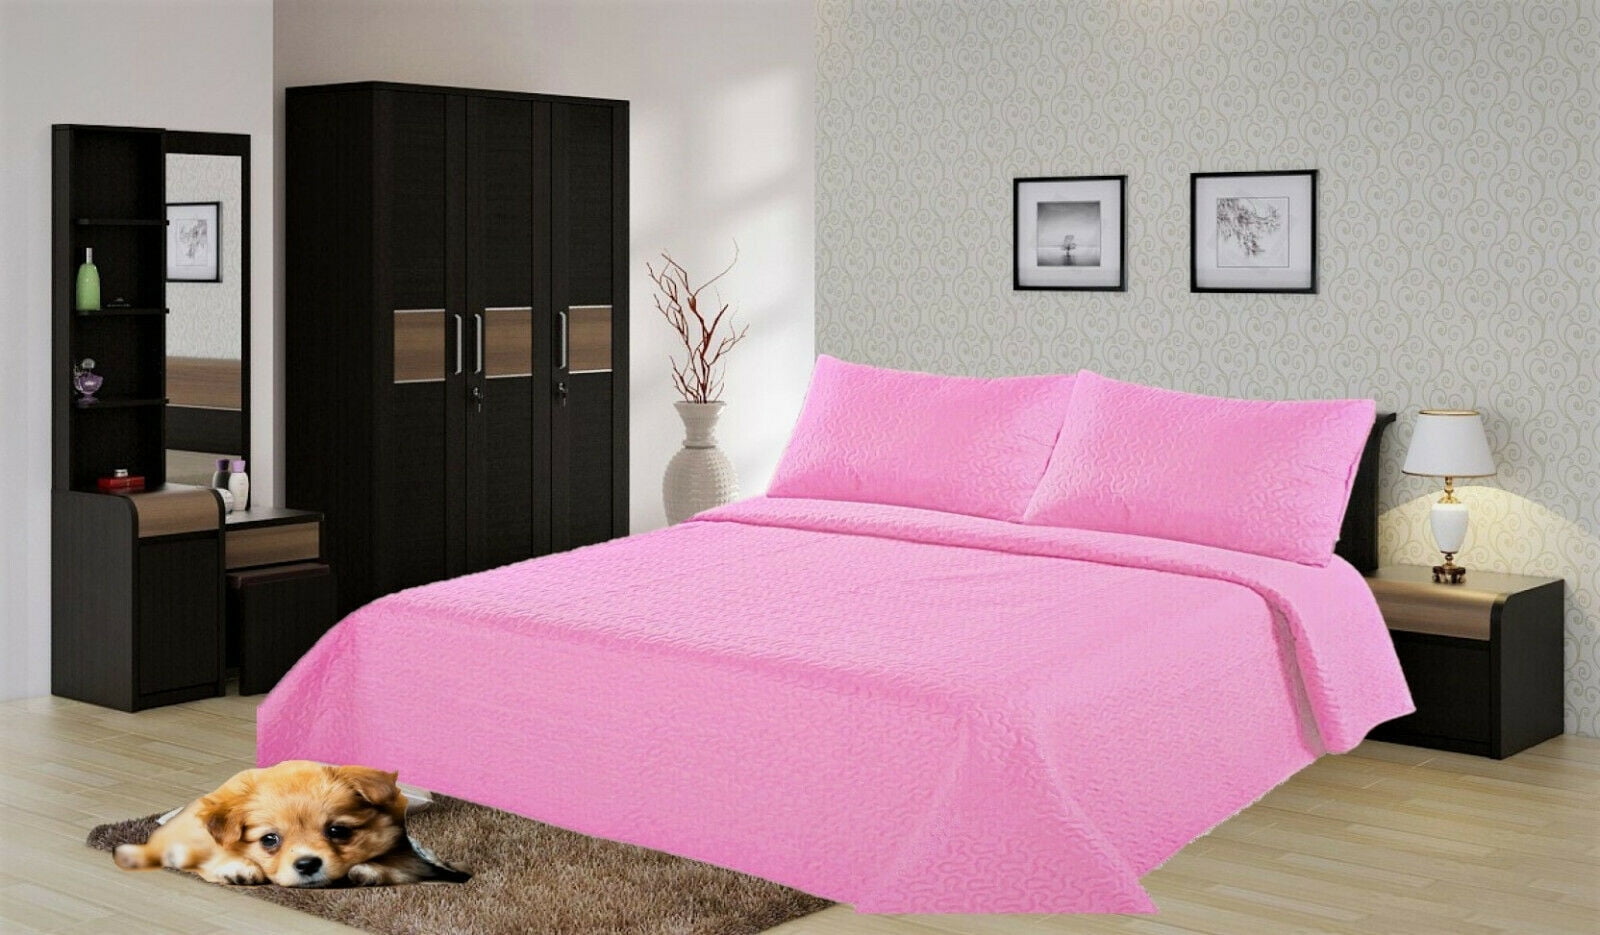 2/3PC HOT PINK NENA BEDSPREAD QUILT SET COVERLET STIPPLING STITCHE IN 4 SIZES 